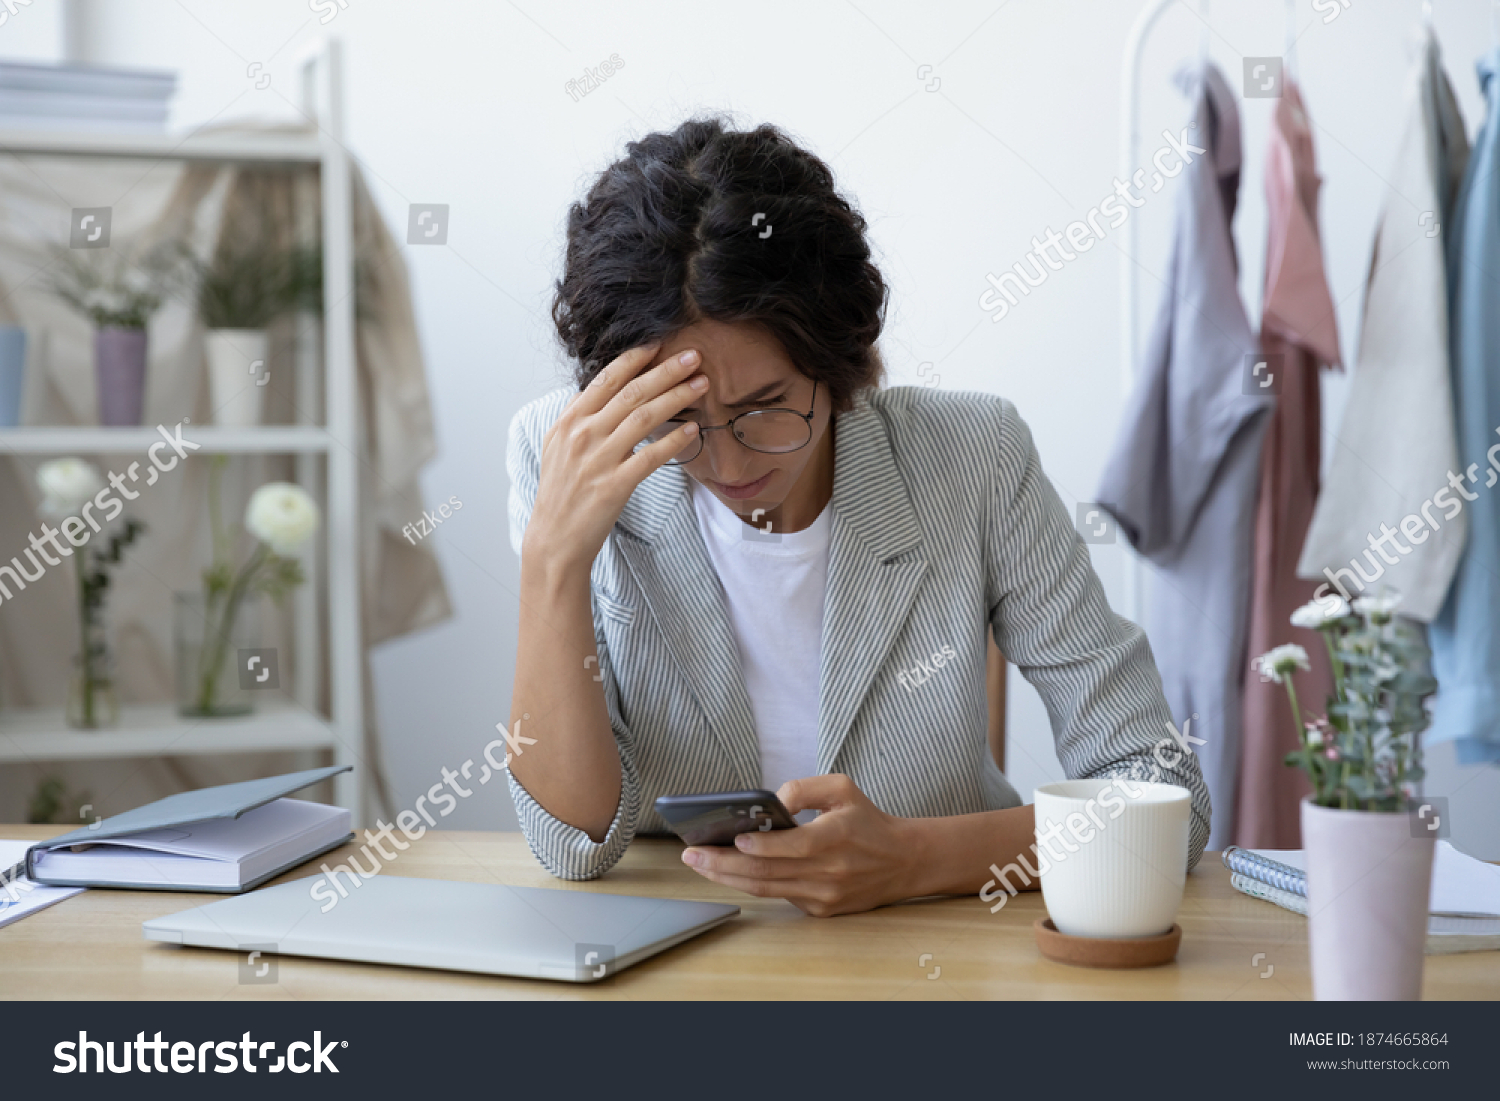 Unexpected problems. Concerned young woman self employed florist getting email with bad news about debt bankruptcy. Female tailor owner of make and mend service stressed after losing customer order #1874665864